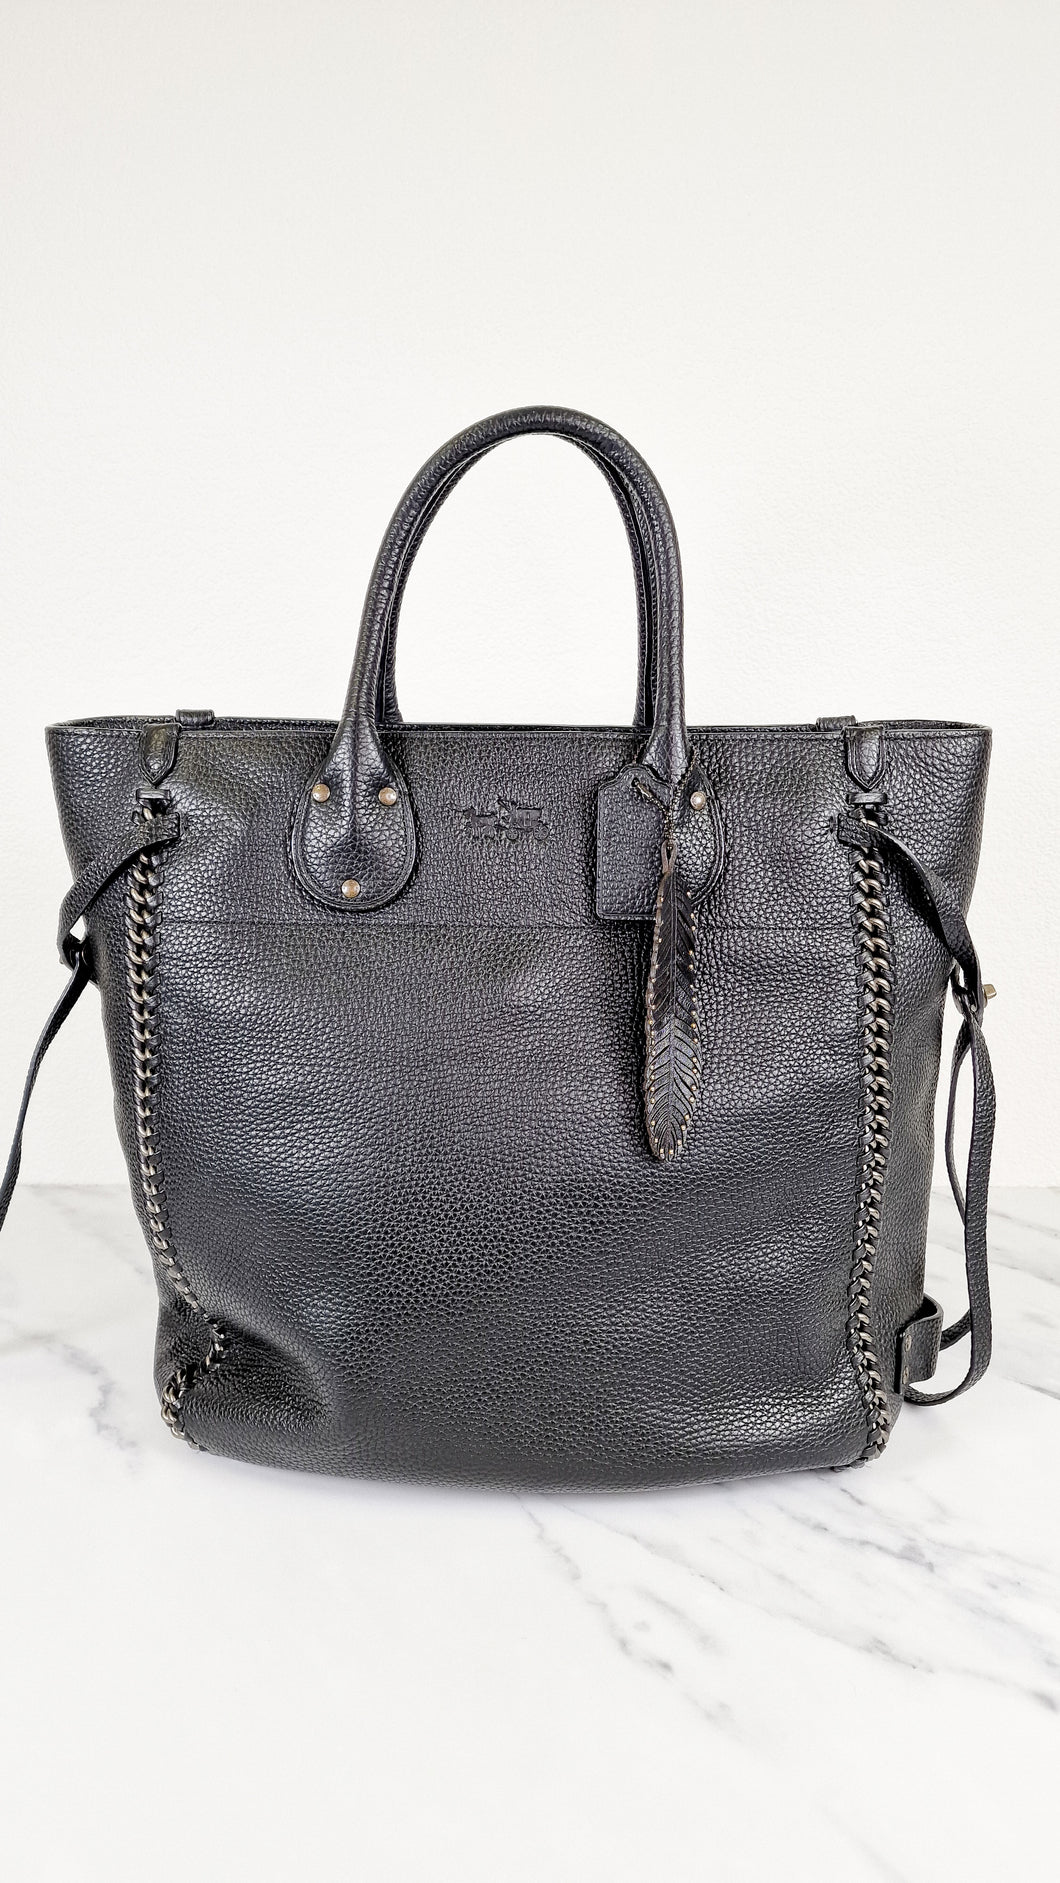 Coach Tatum Tall Tote in Black Pebble Leather with Whiplash Detail & Feather Charm - Large Black Shoulder Bag - Coach 33916